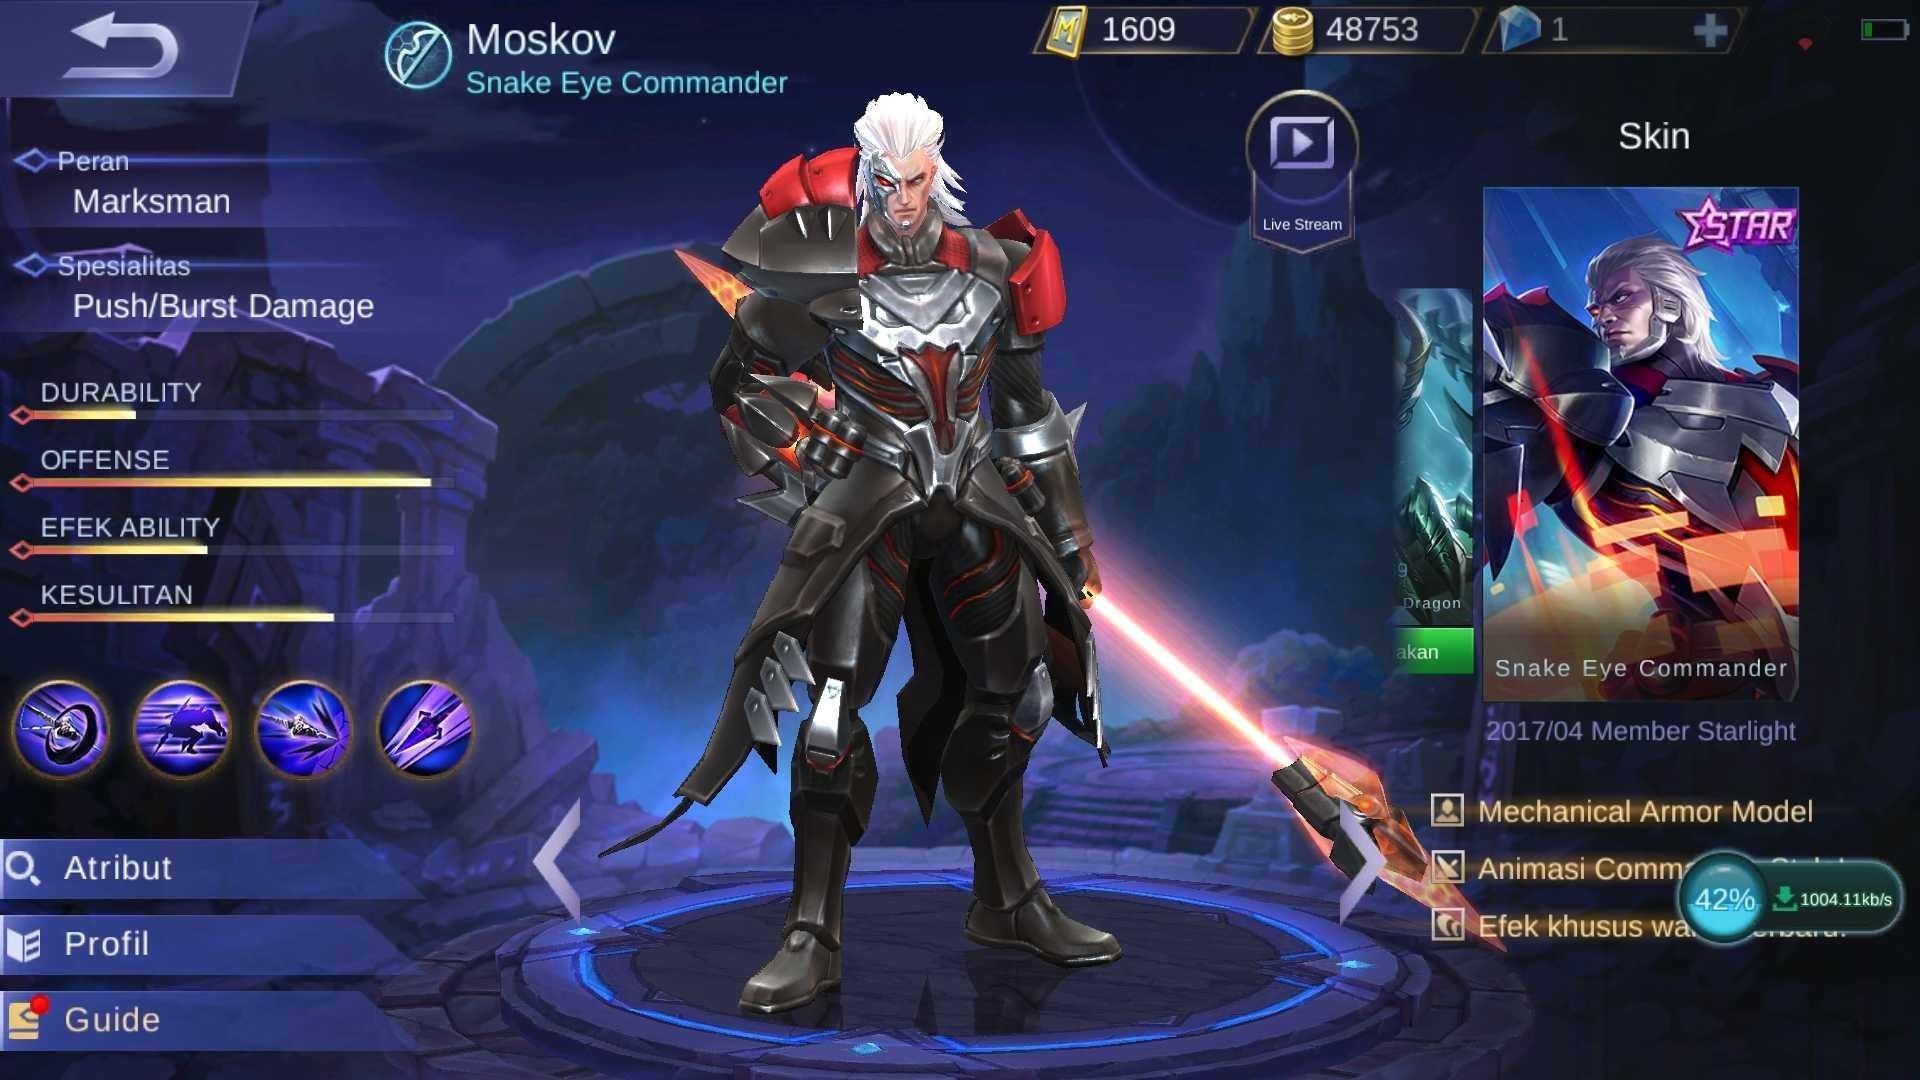 Guide Moskov Mobile Legends The Fastest Thrower In Game Steemit